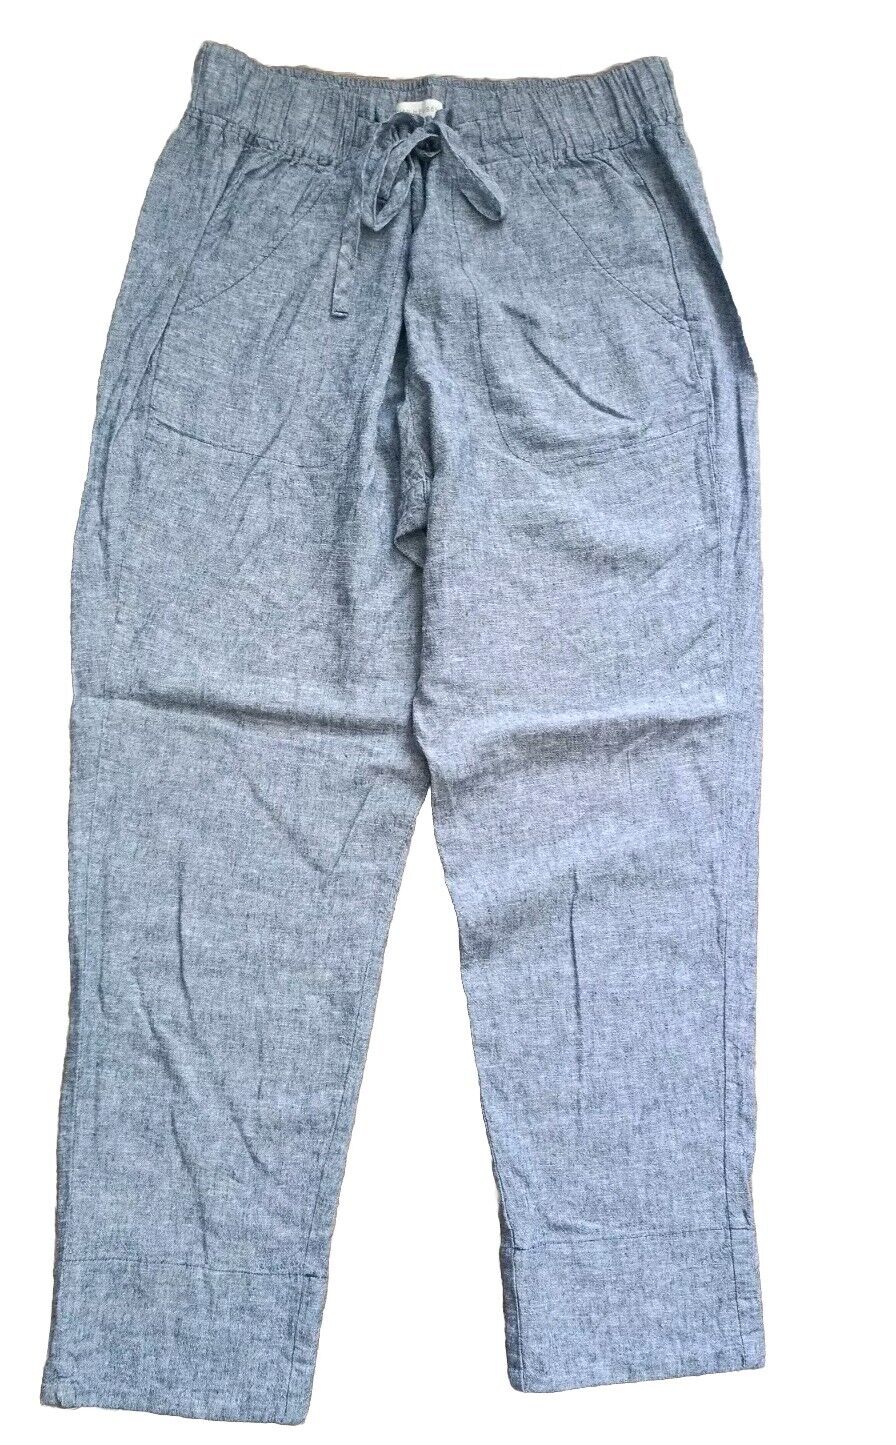 Van Heusen Pants Size 14 Chambray Linen Blend Pull On Casual Stretch Drawstring 